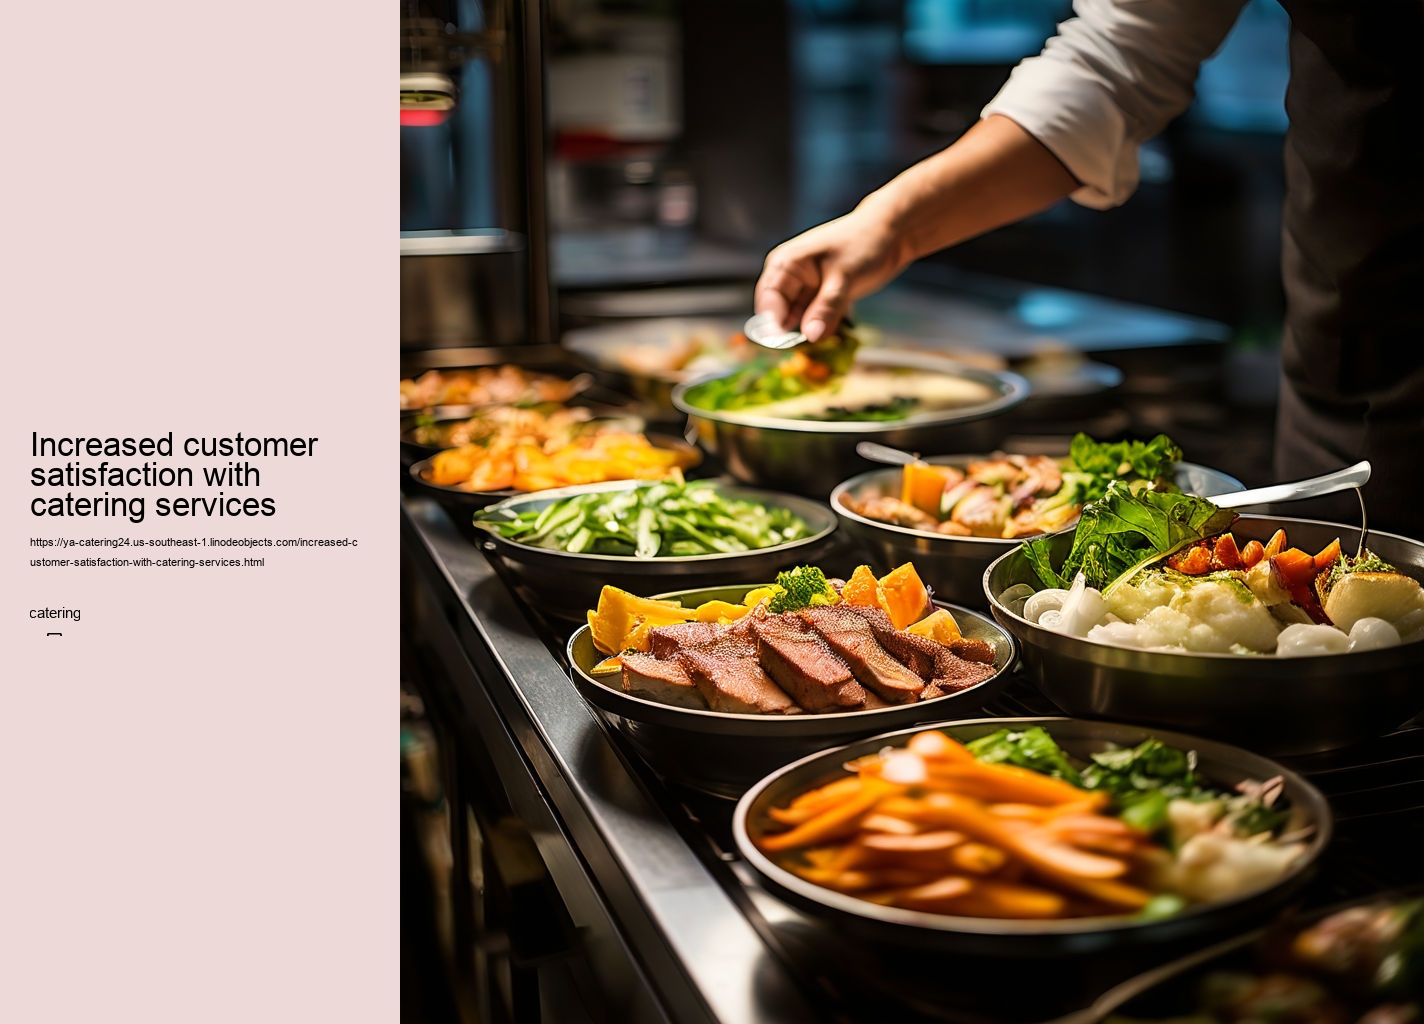 Increased customer satisfaction with catering services